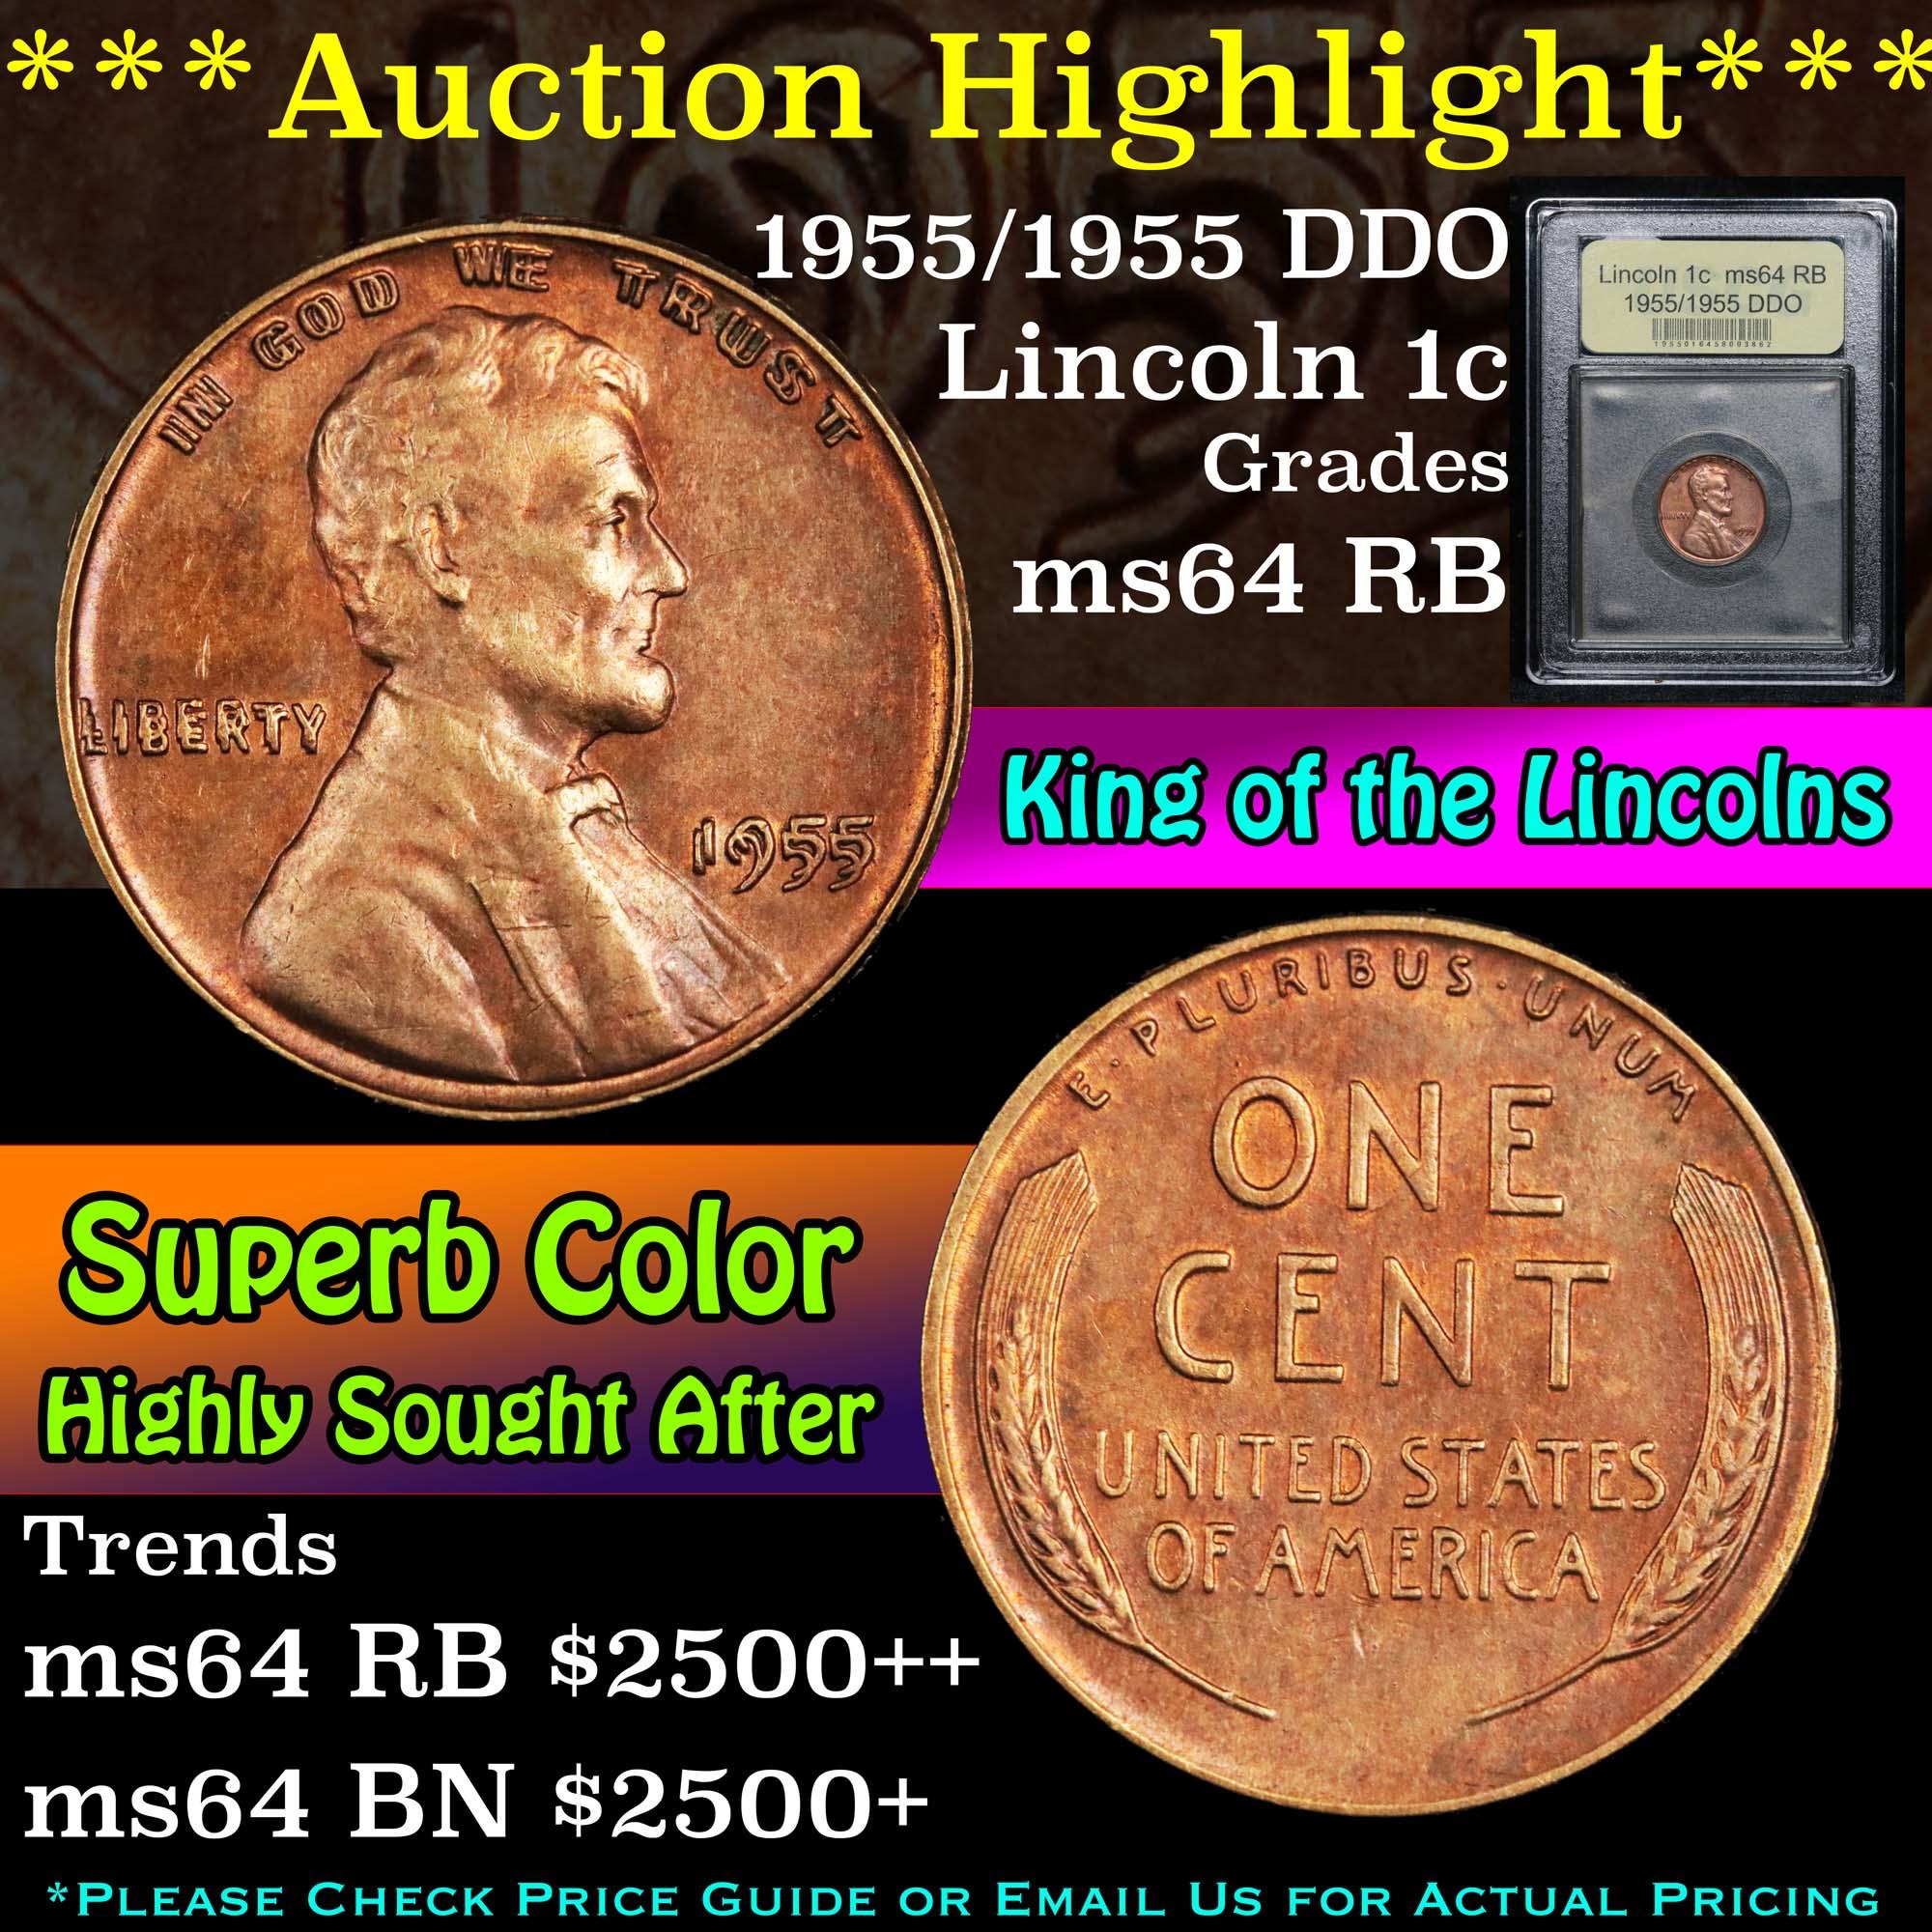 ***Auction Highlight*** 1955/1955 DDO Lincoln Cent 1c Graded Choice Unc RB By USCG (fc)